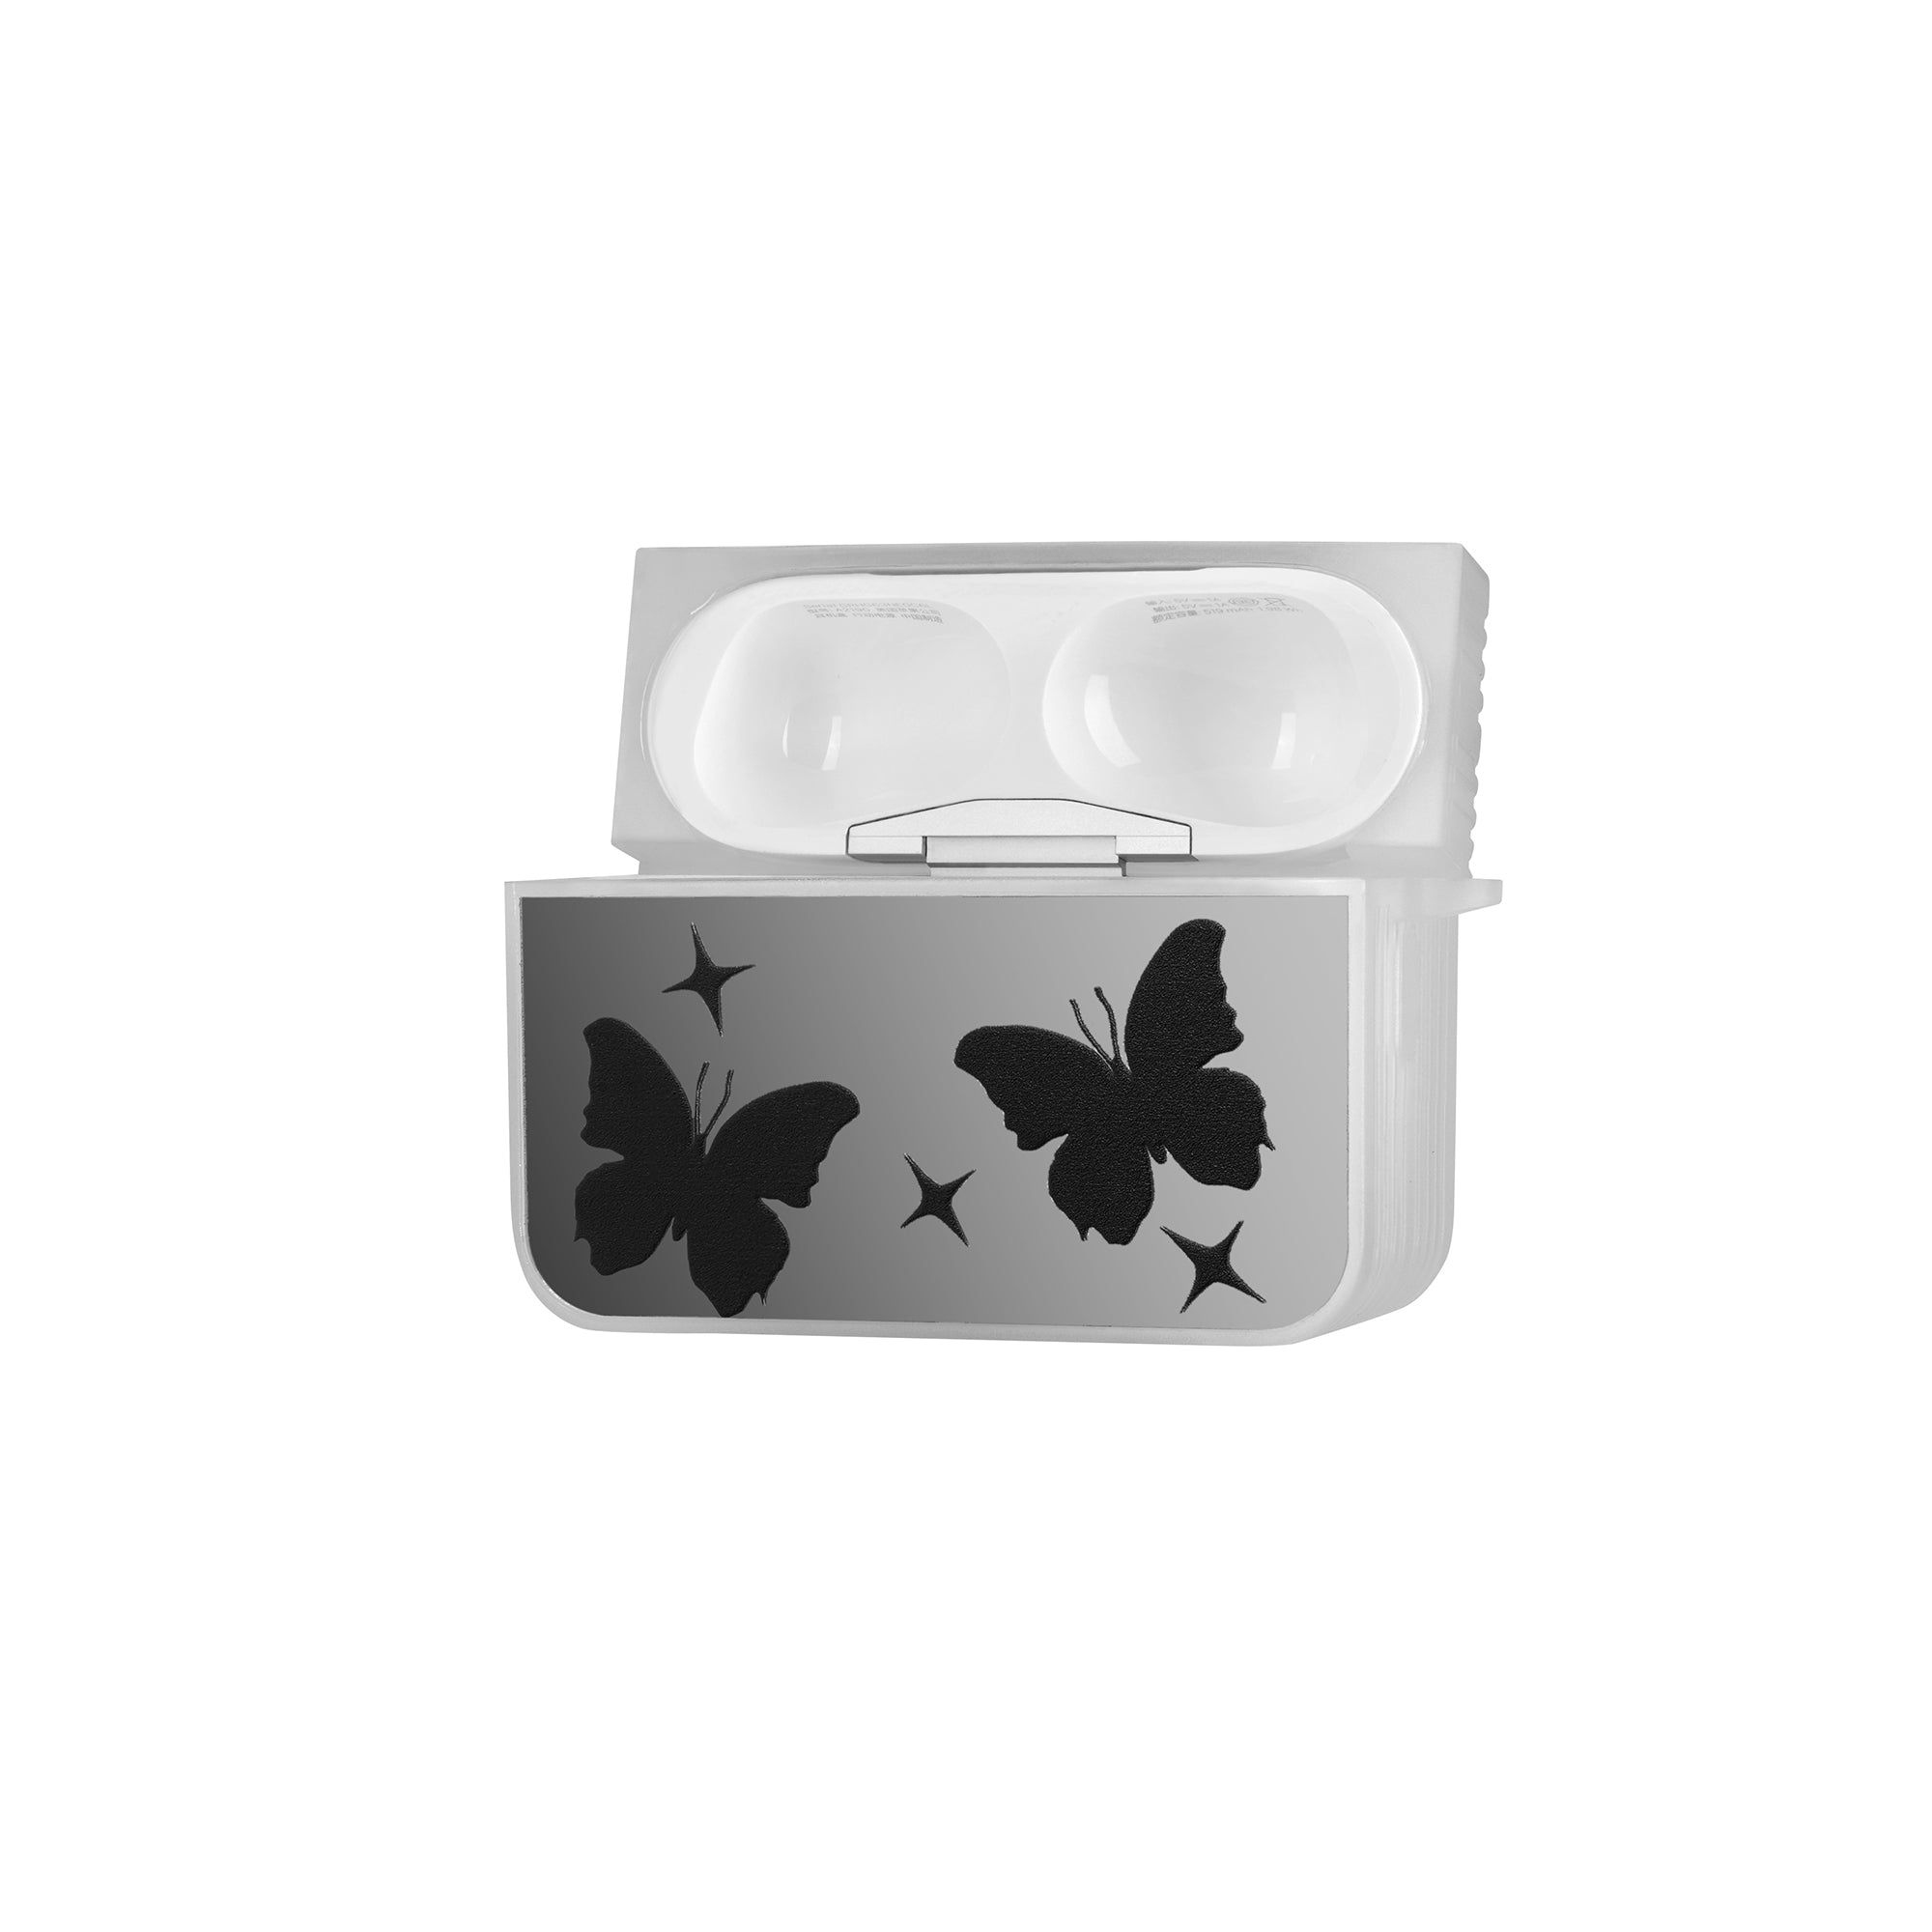 Reflective Mirror Butterfly AirPods Case